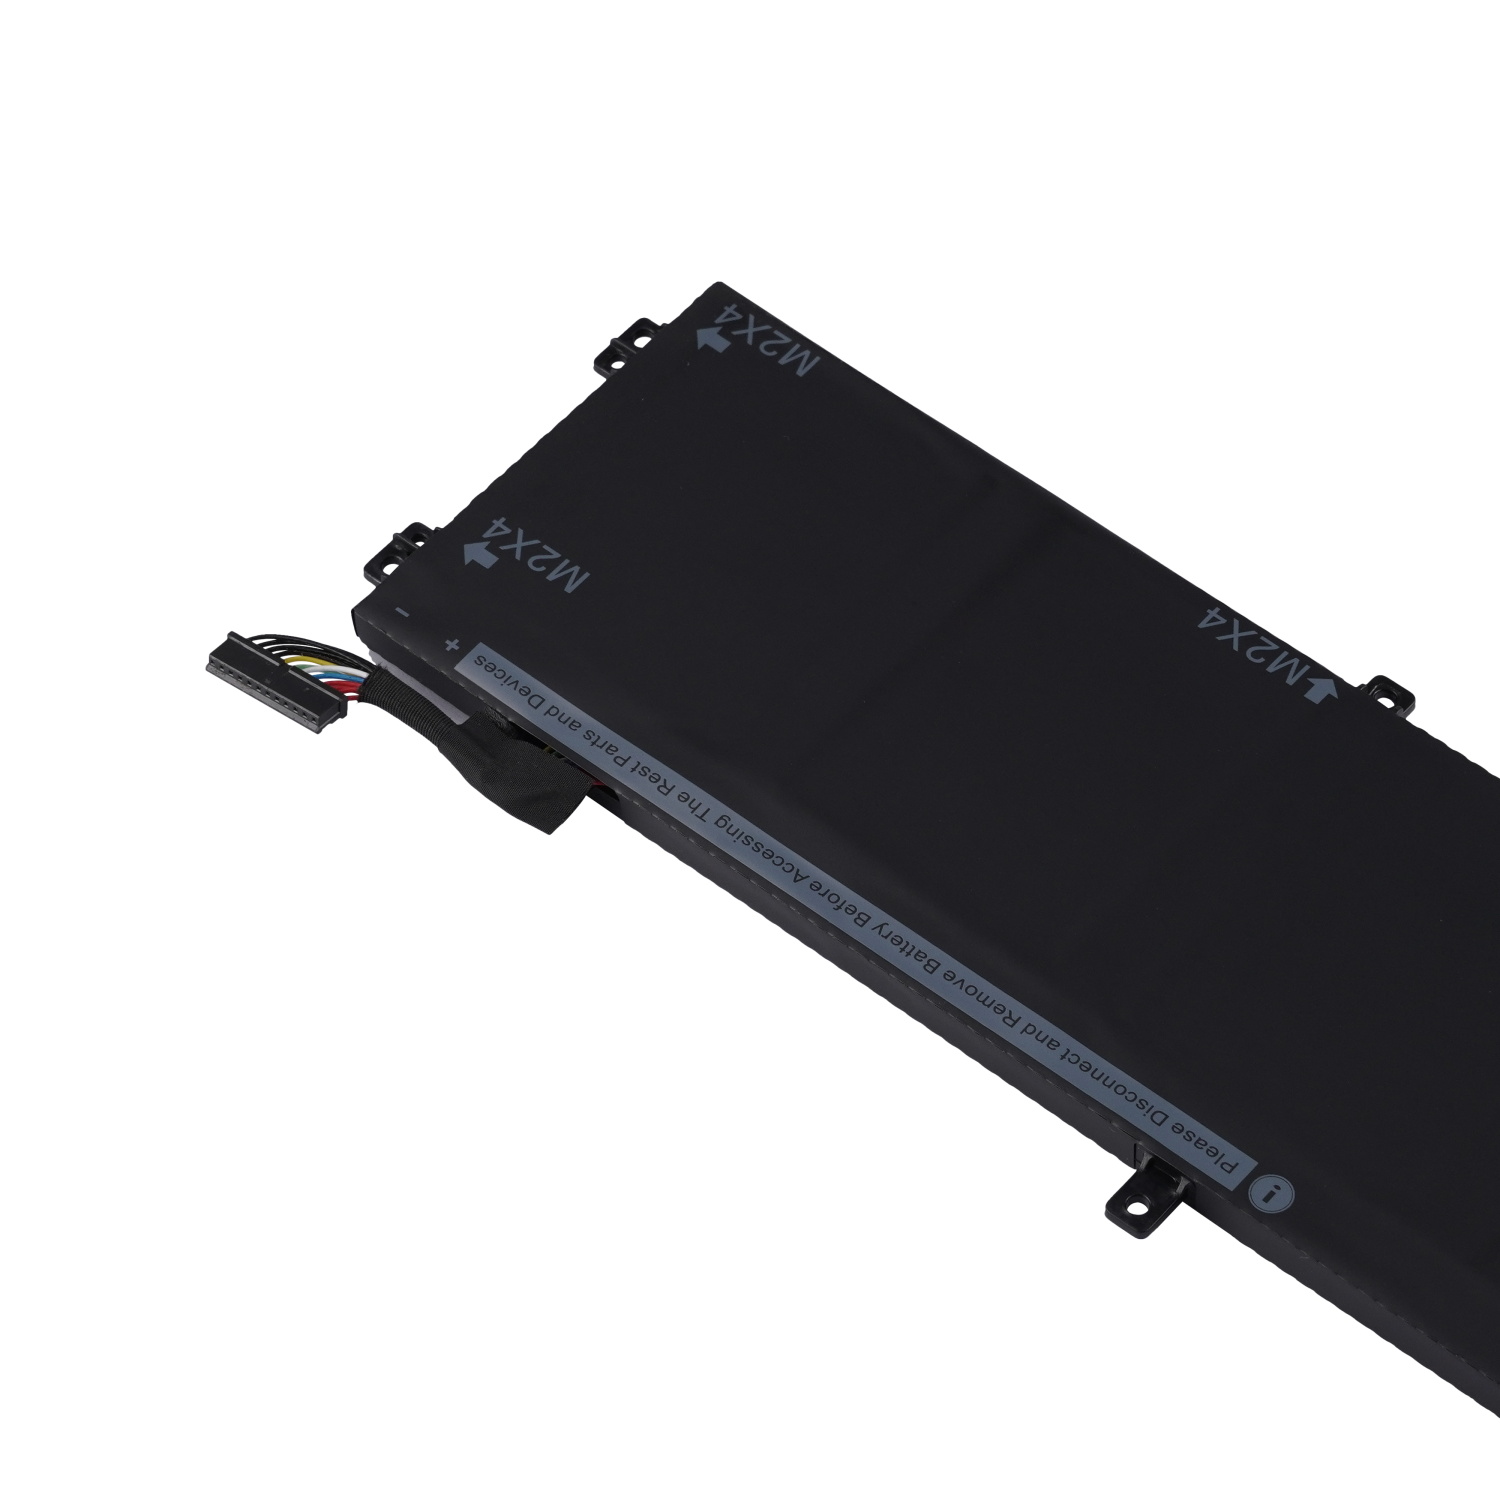 4GVGH laptop battery lithium ion batteries 11.4V 84Wh 7800mAh 6cell for DELL 5510 15 9550 15-9550-D1828T XPS15 9550 laptop